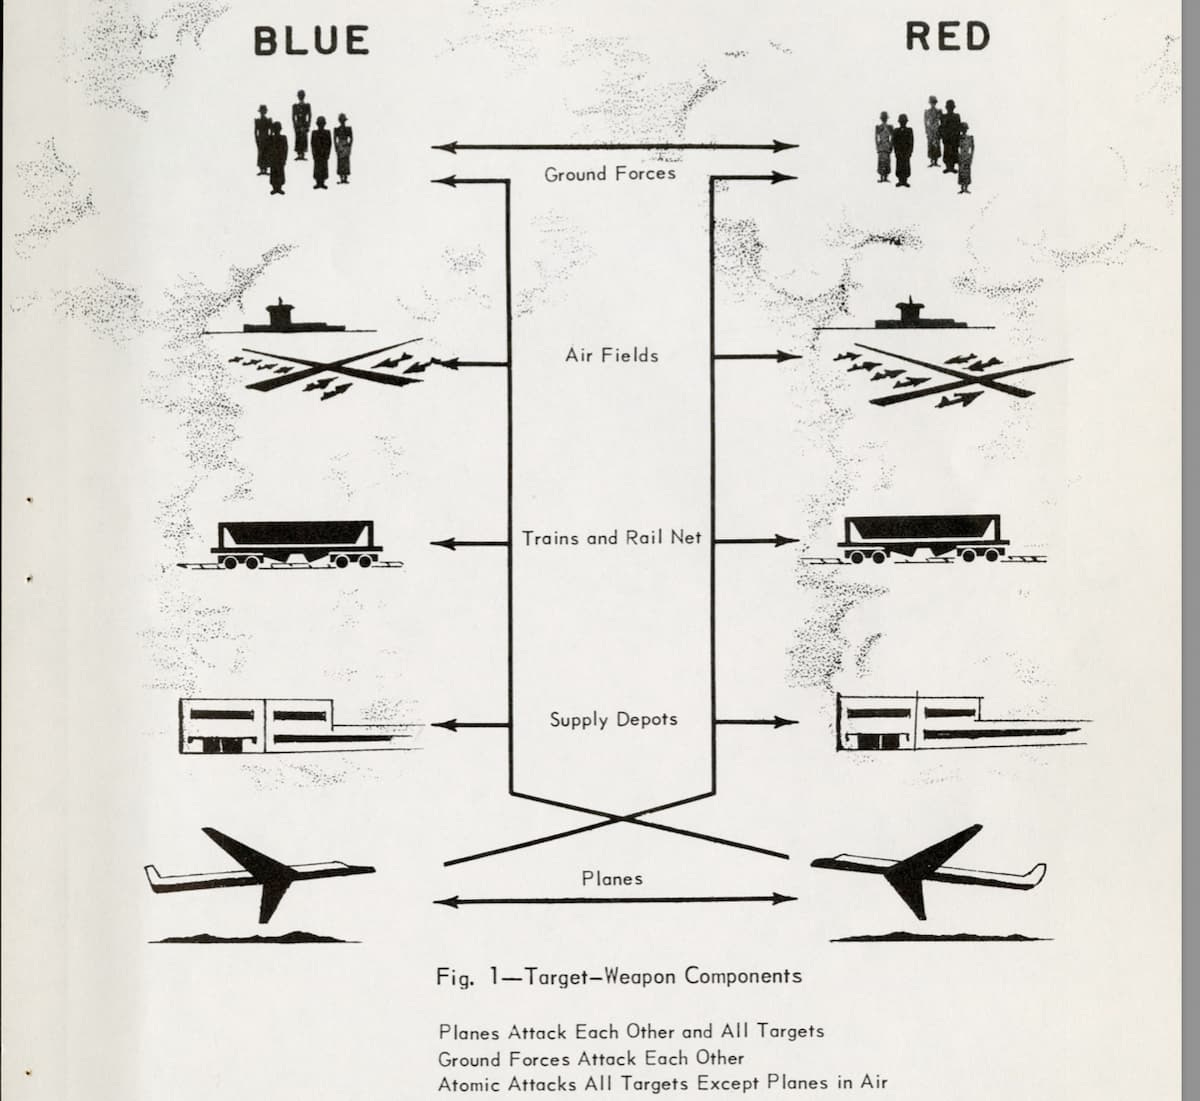 Diagram from HUTSPIEL report showing that Blue and Red players both control ground forces, air fields, trains and rail net, supply depots, and planes. 